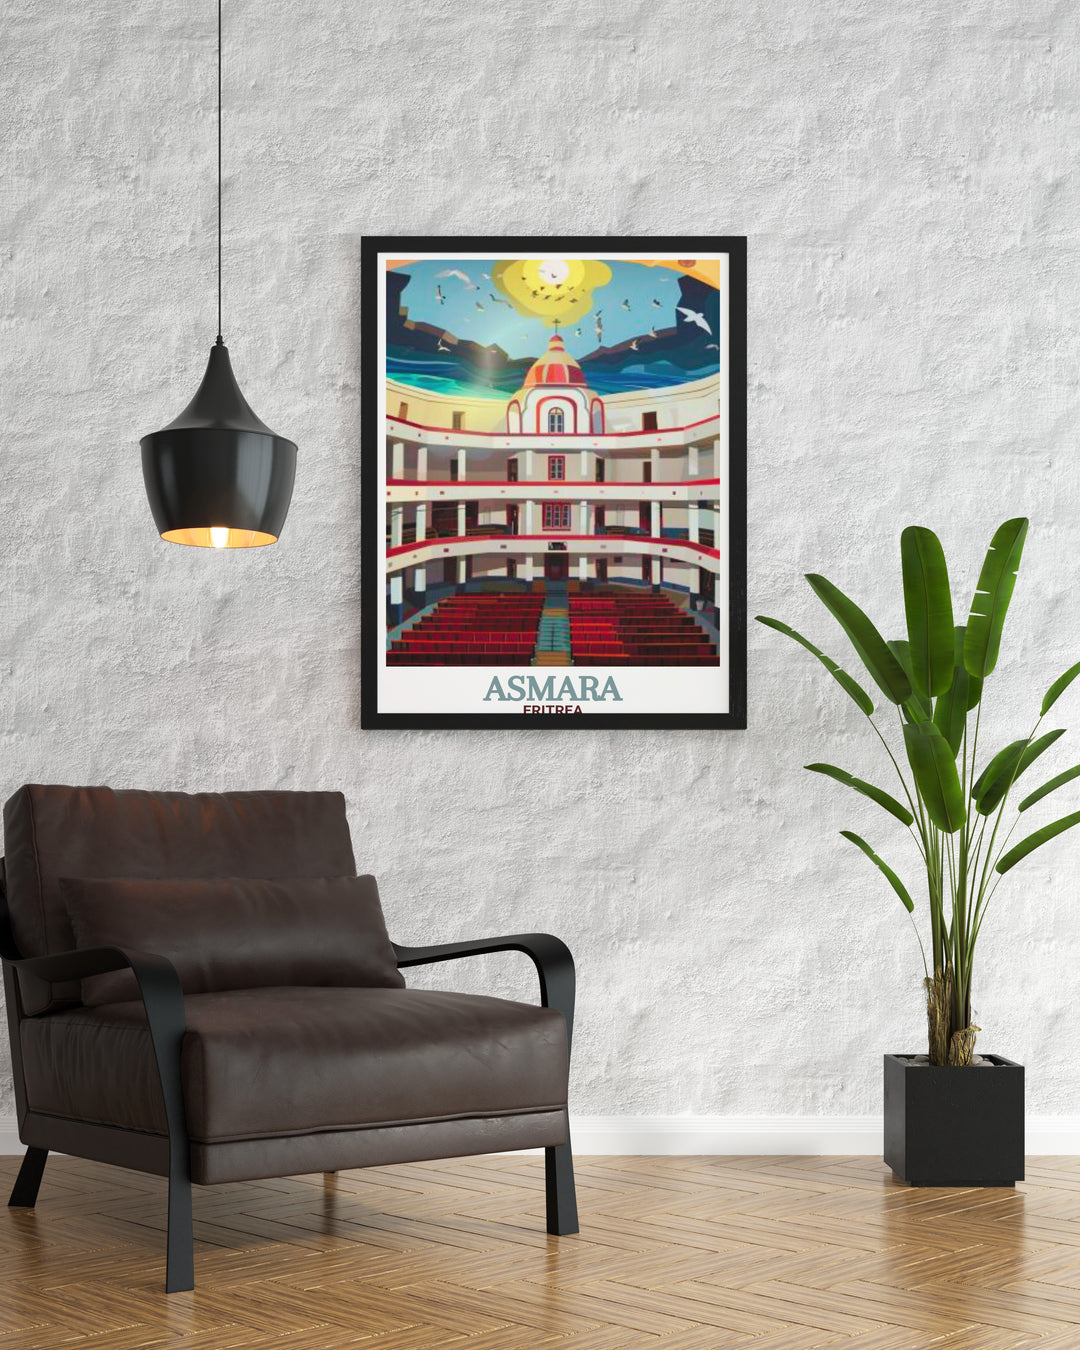 Stunning Asmara skyline travel poster with Opera House centerpiece, in rich color palette, ideal for adding sophistication to home or office decor.